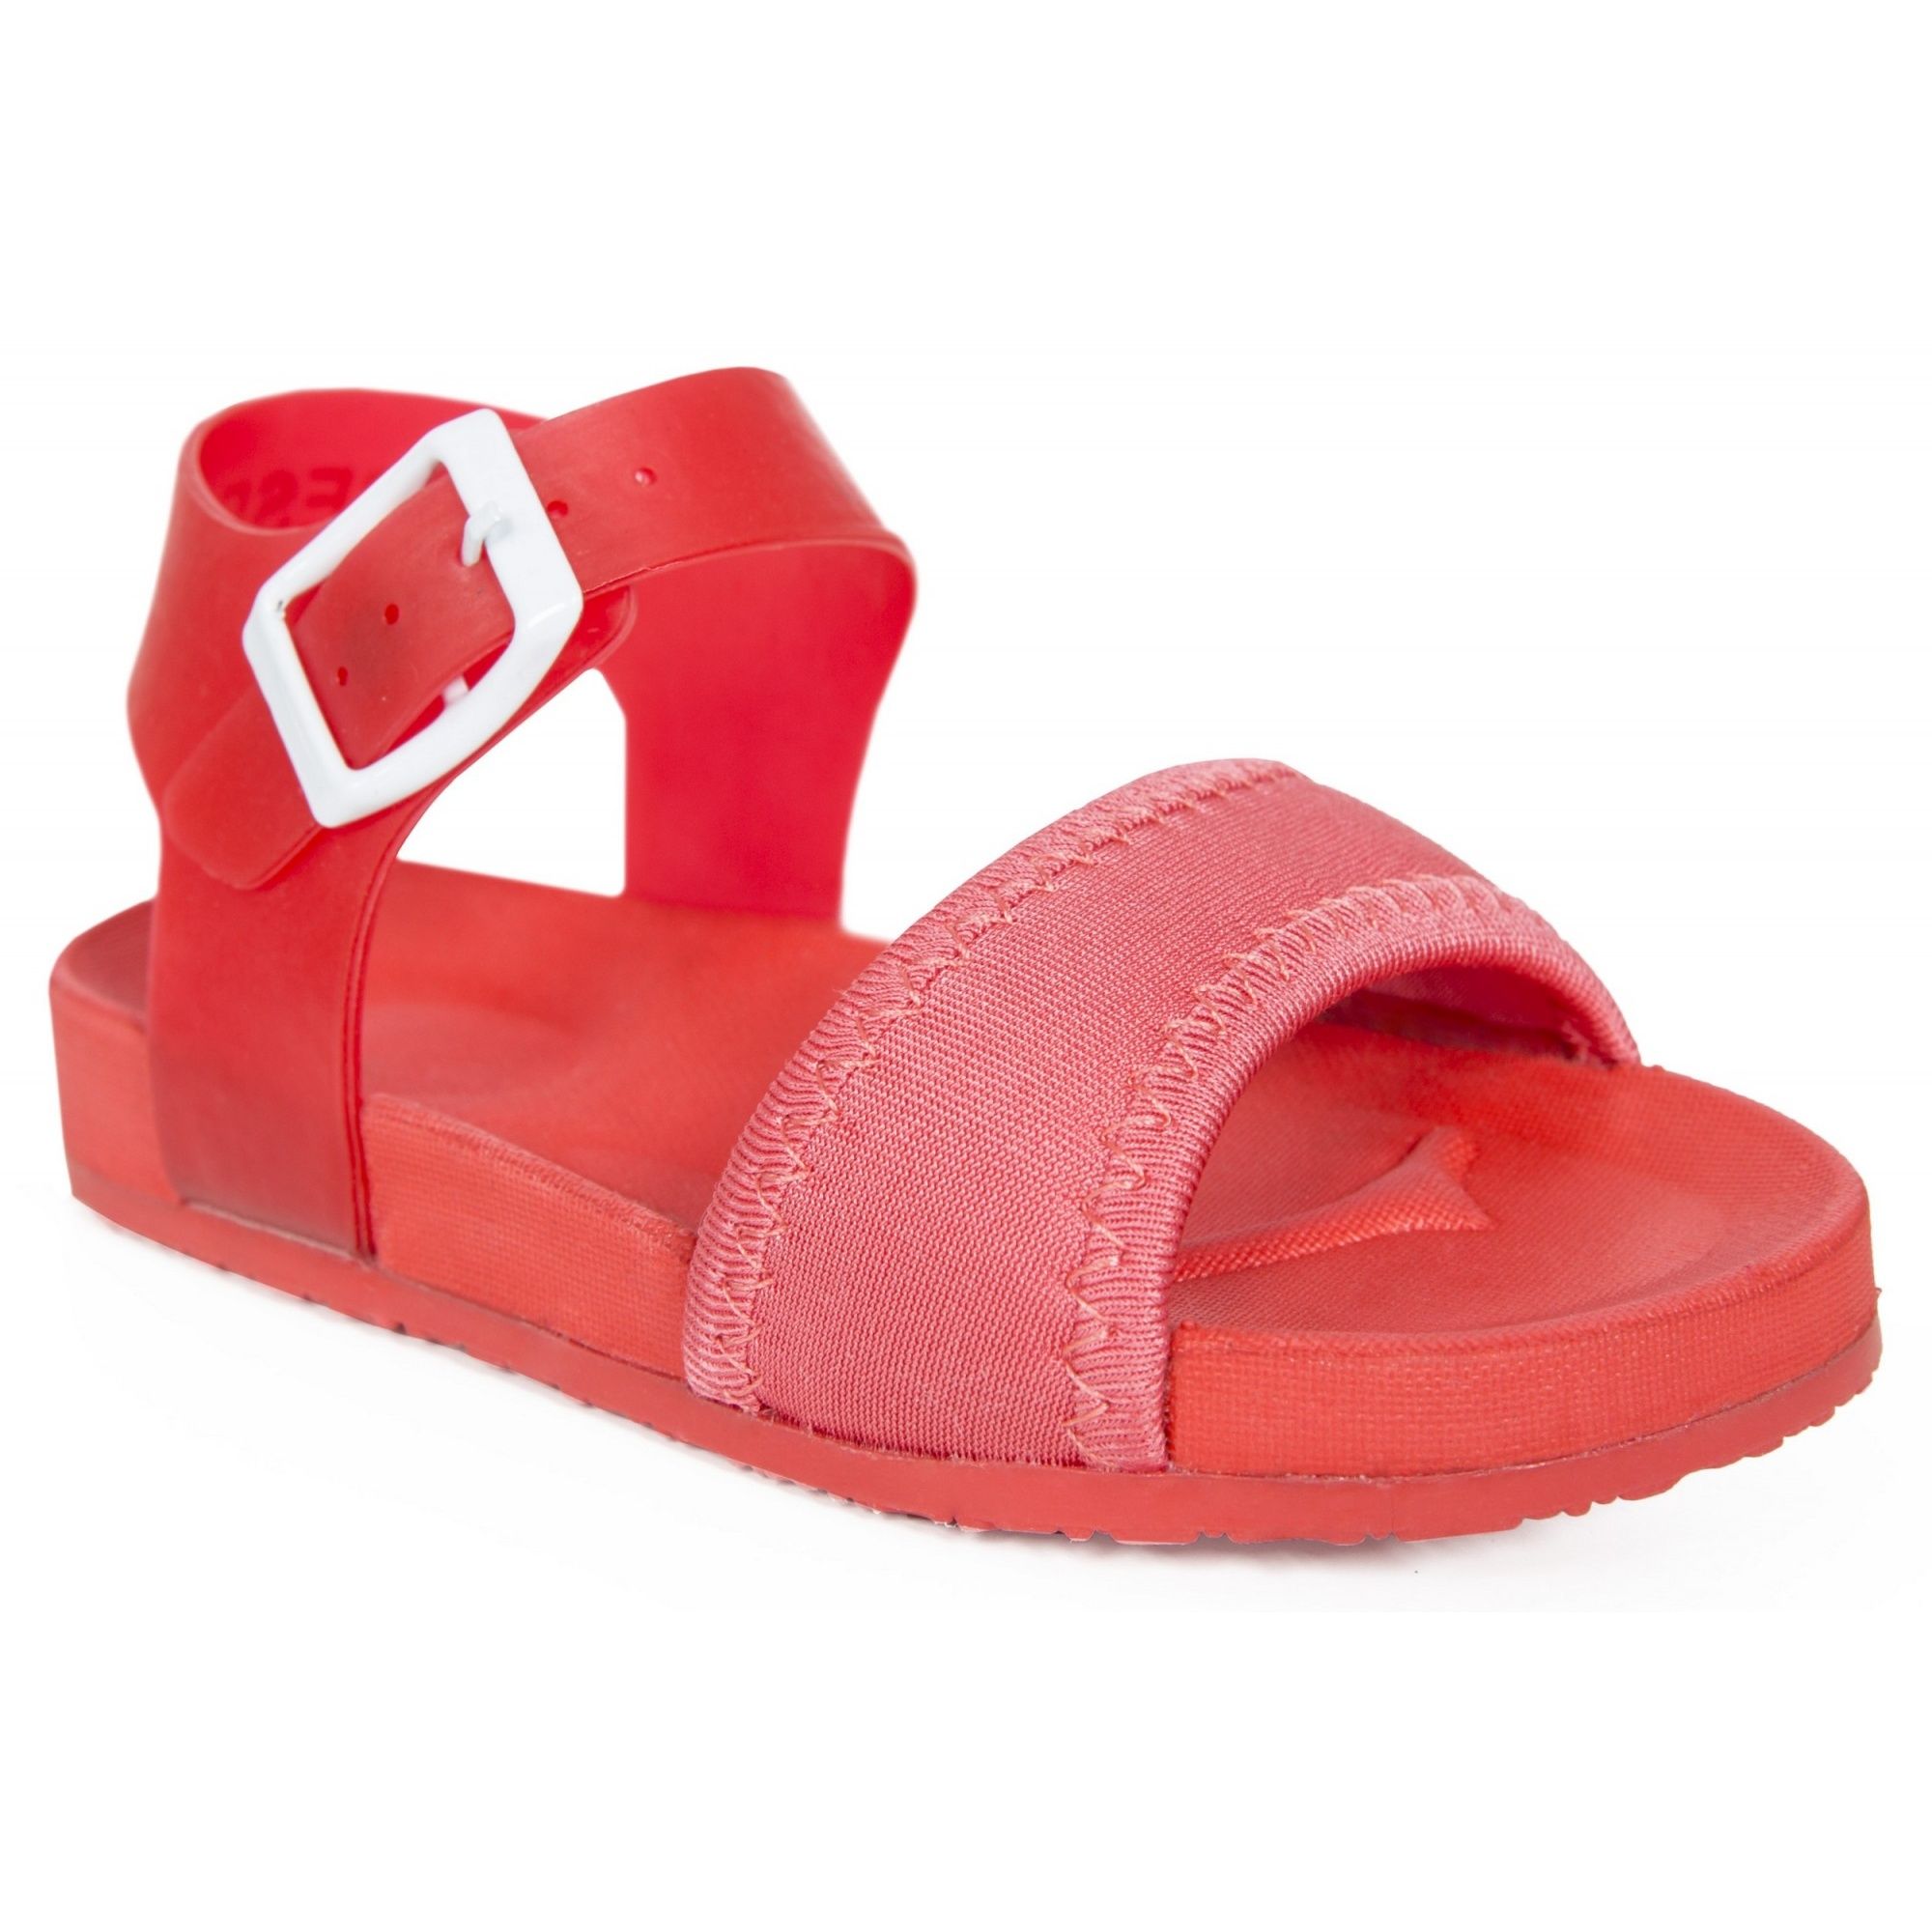 Kids sandals. Adjustable buckle strap. Cushioned and moulded footbed. Durable traction outsole. Upper: PVC/Textile, Midsole: EVA, Outsole: TPR.